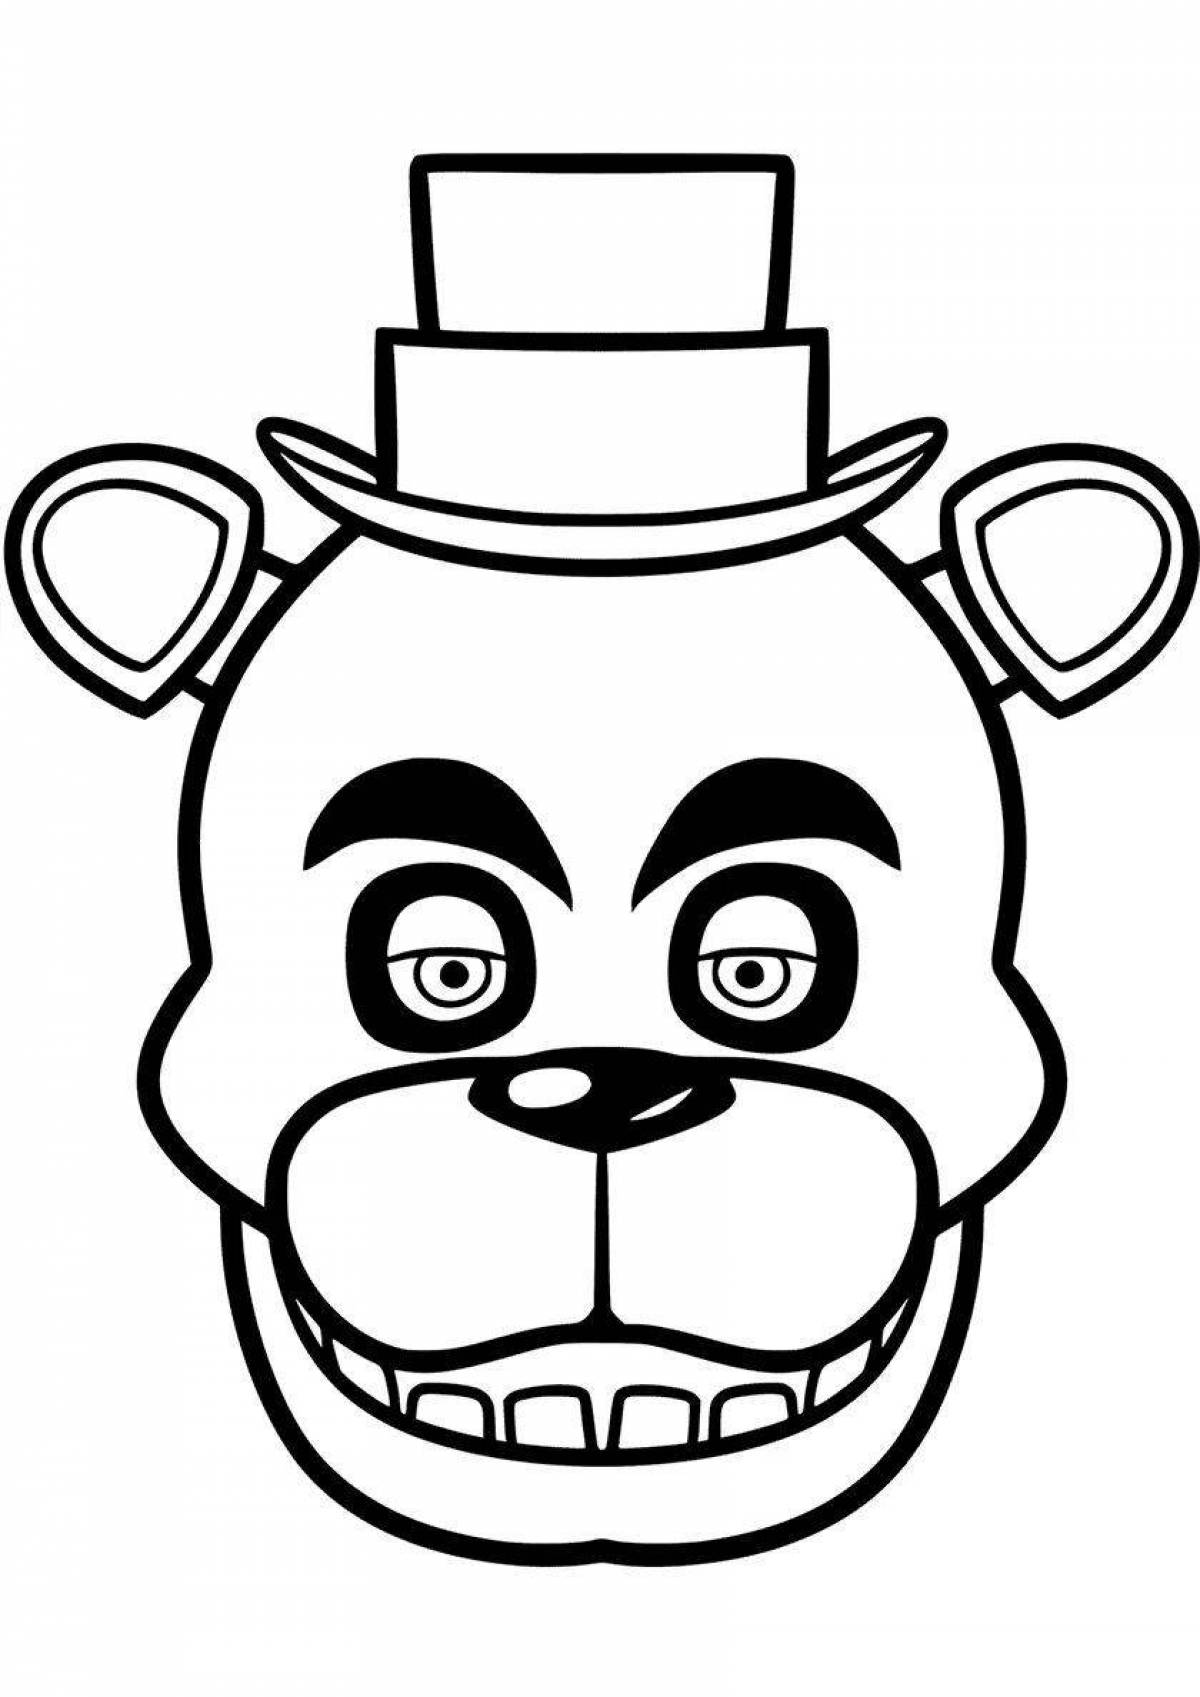 Freddy's fun coloring book for kids